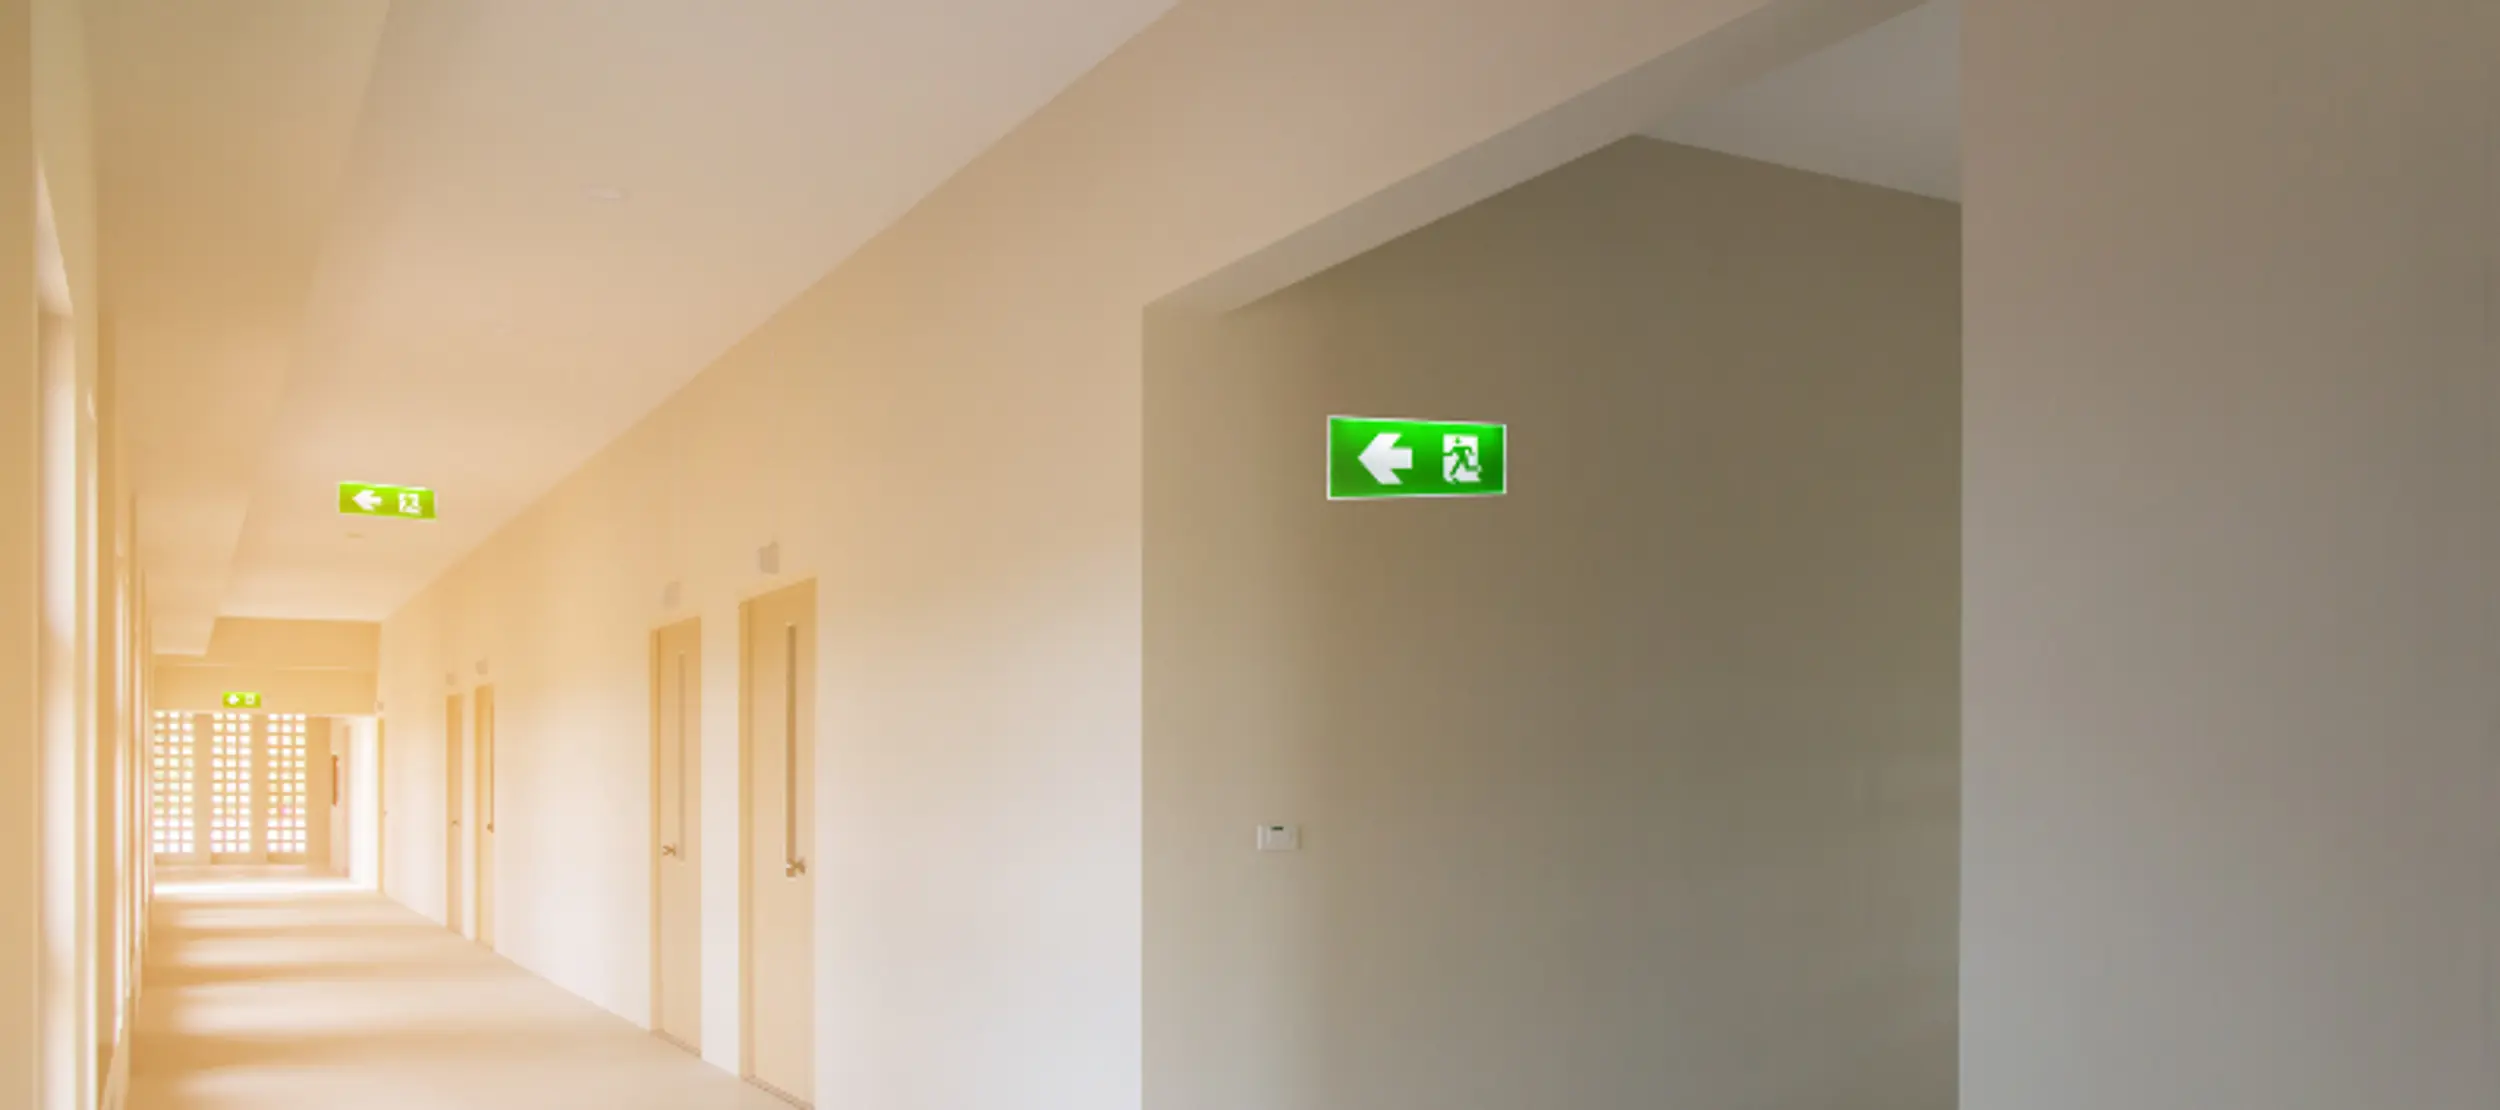 Emergency lighting for care home fire exit